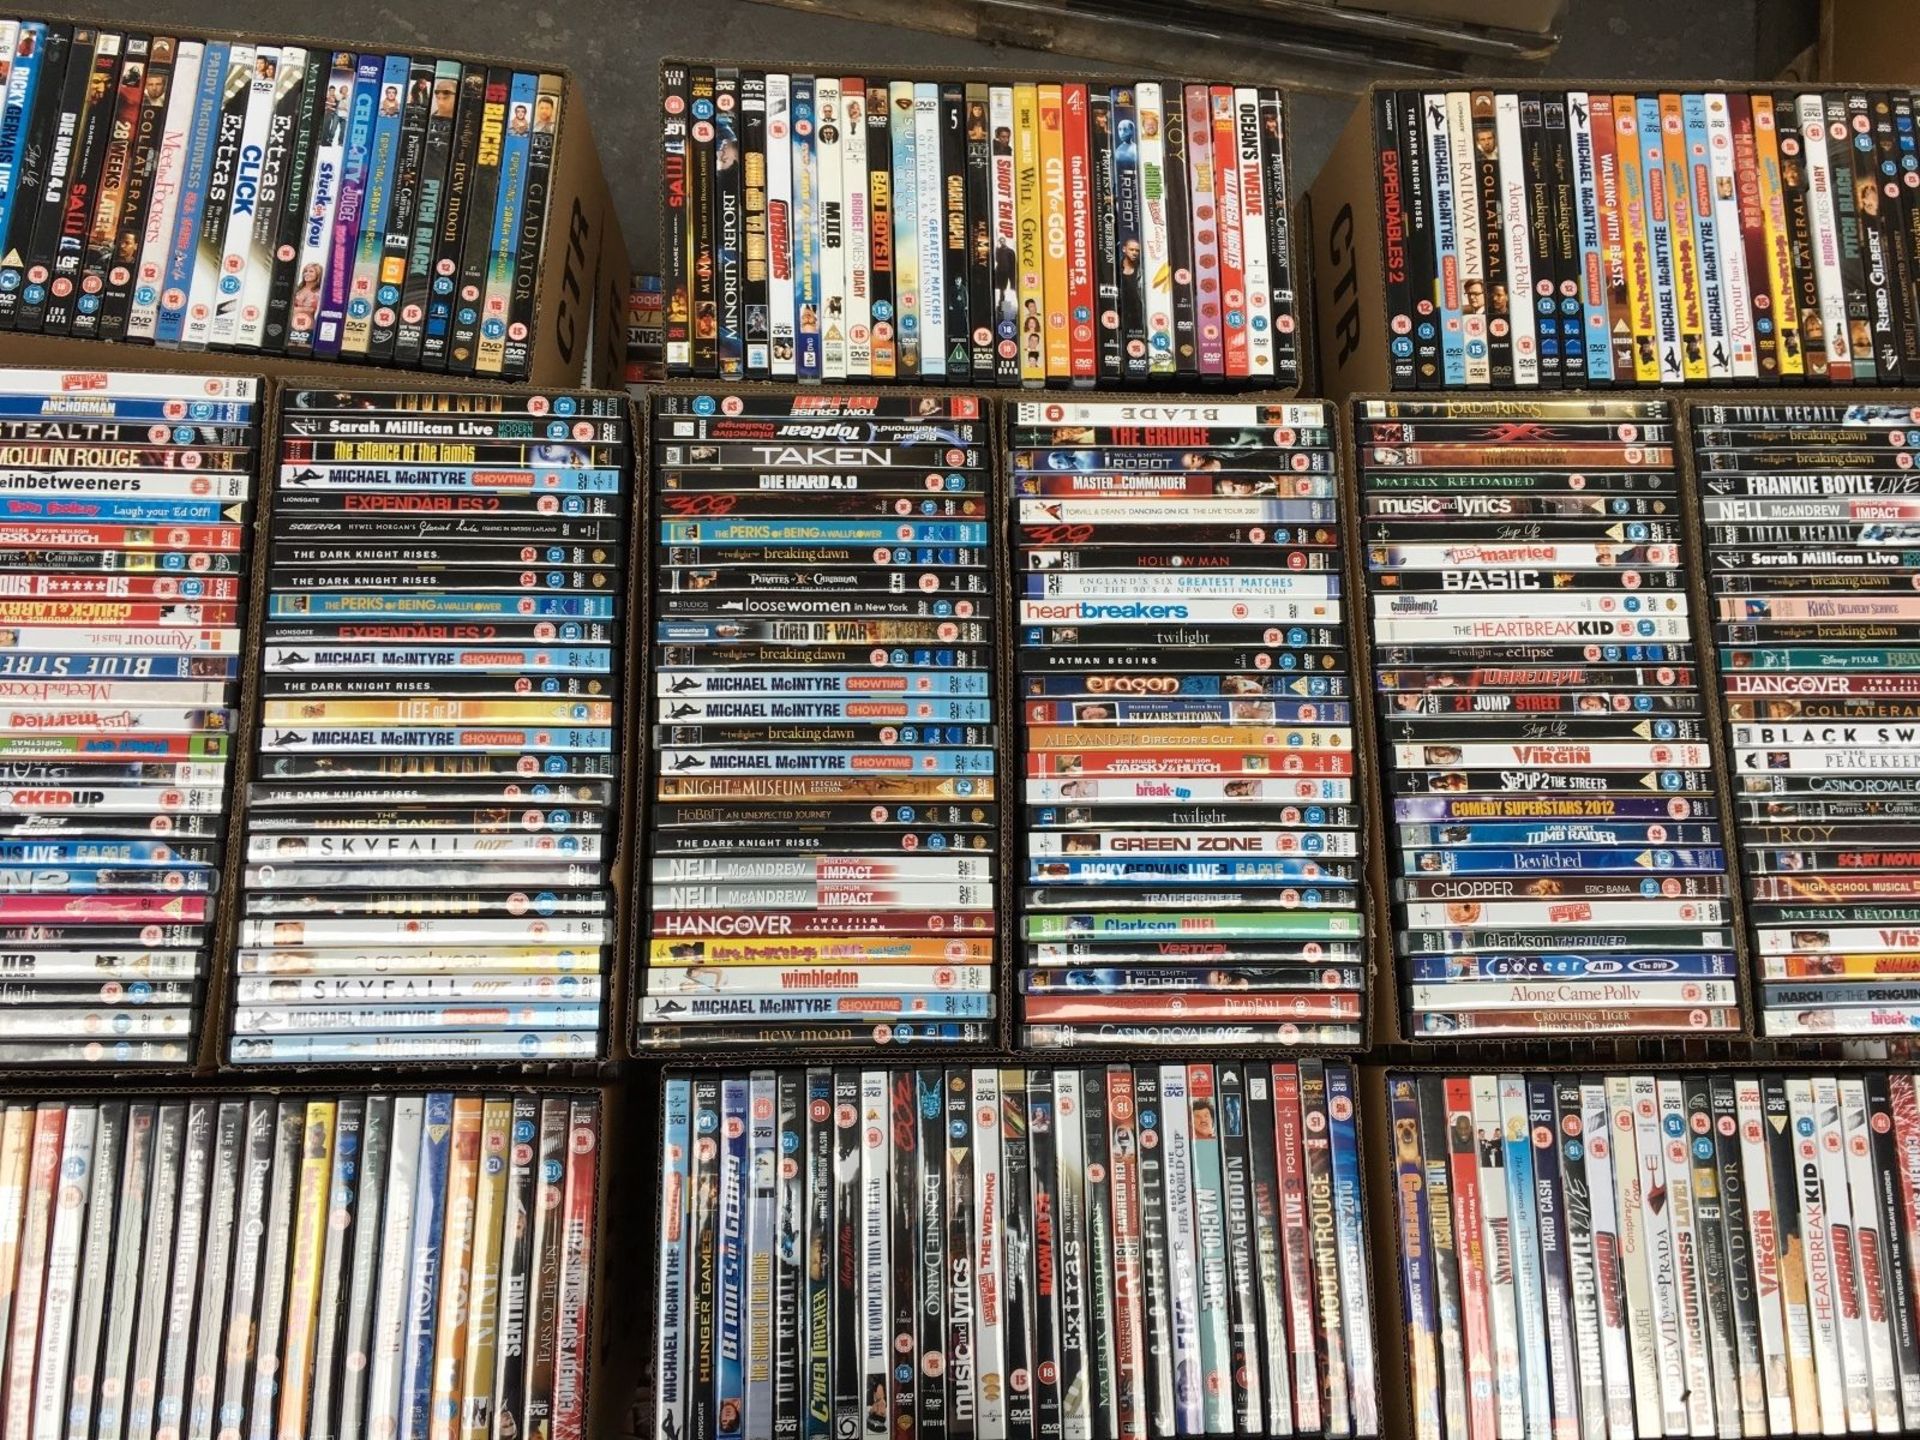 JOB LOT OF 100 x VARIOUS DVD'S - REGION 2 - USED - GOOD ASSORTMENT OF TITLES - NO RESERVE